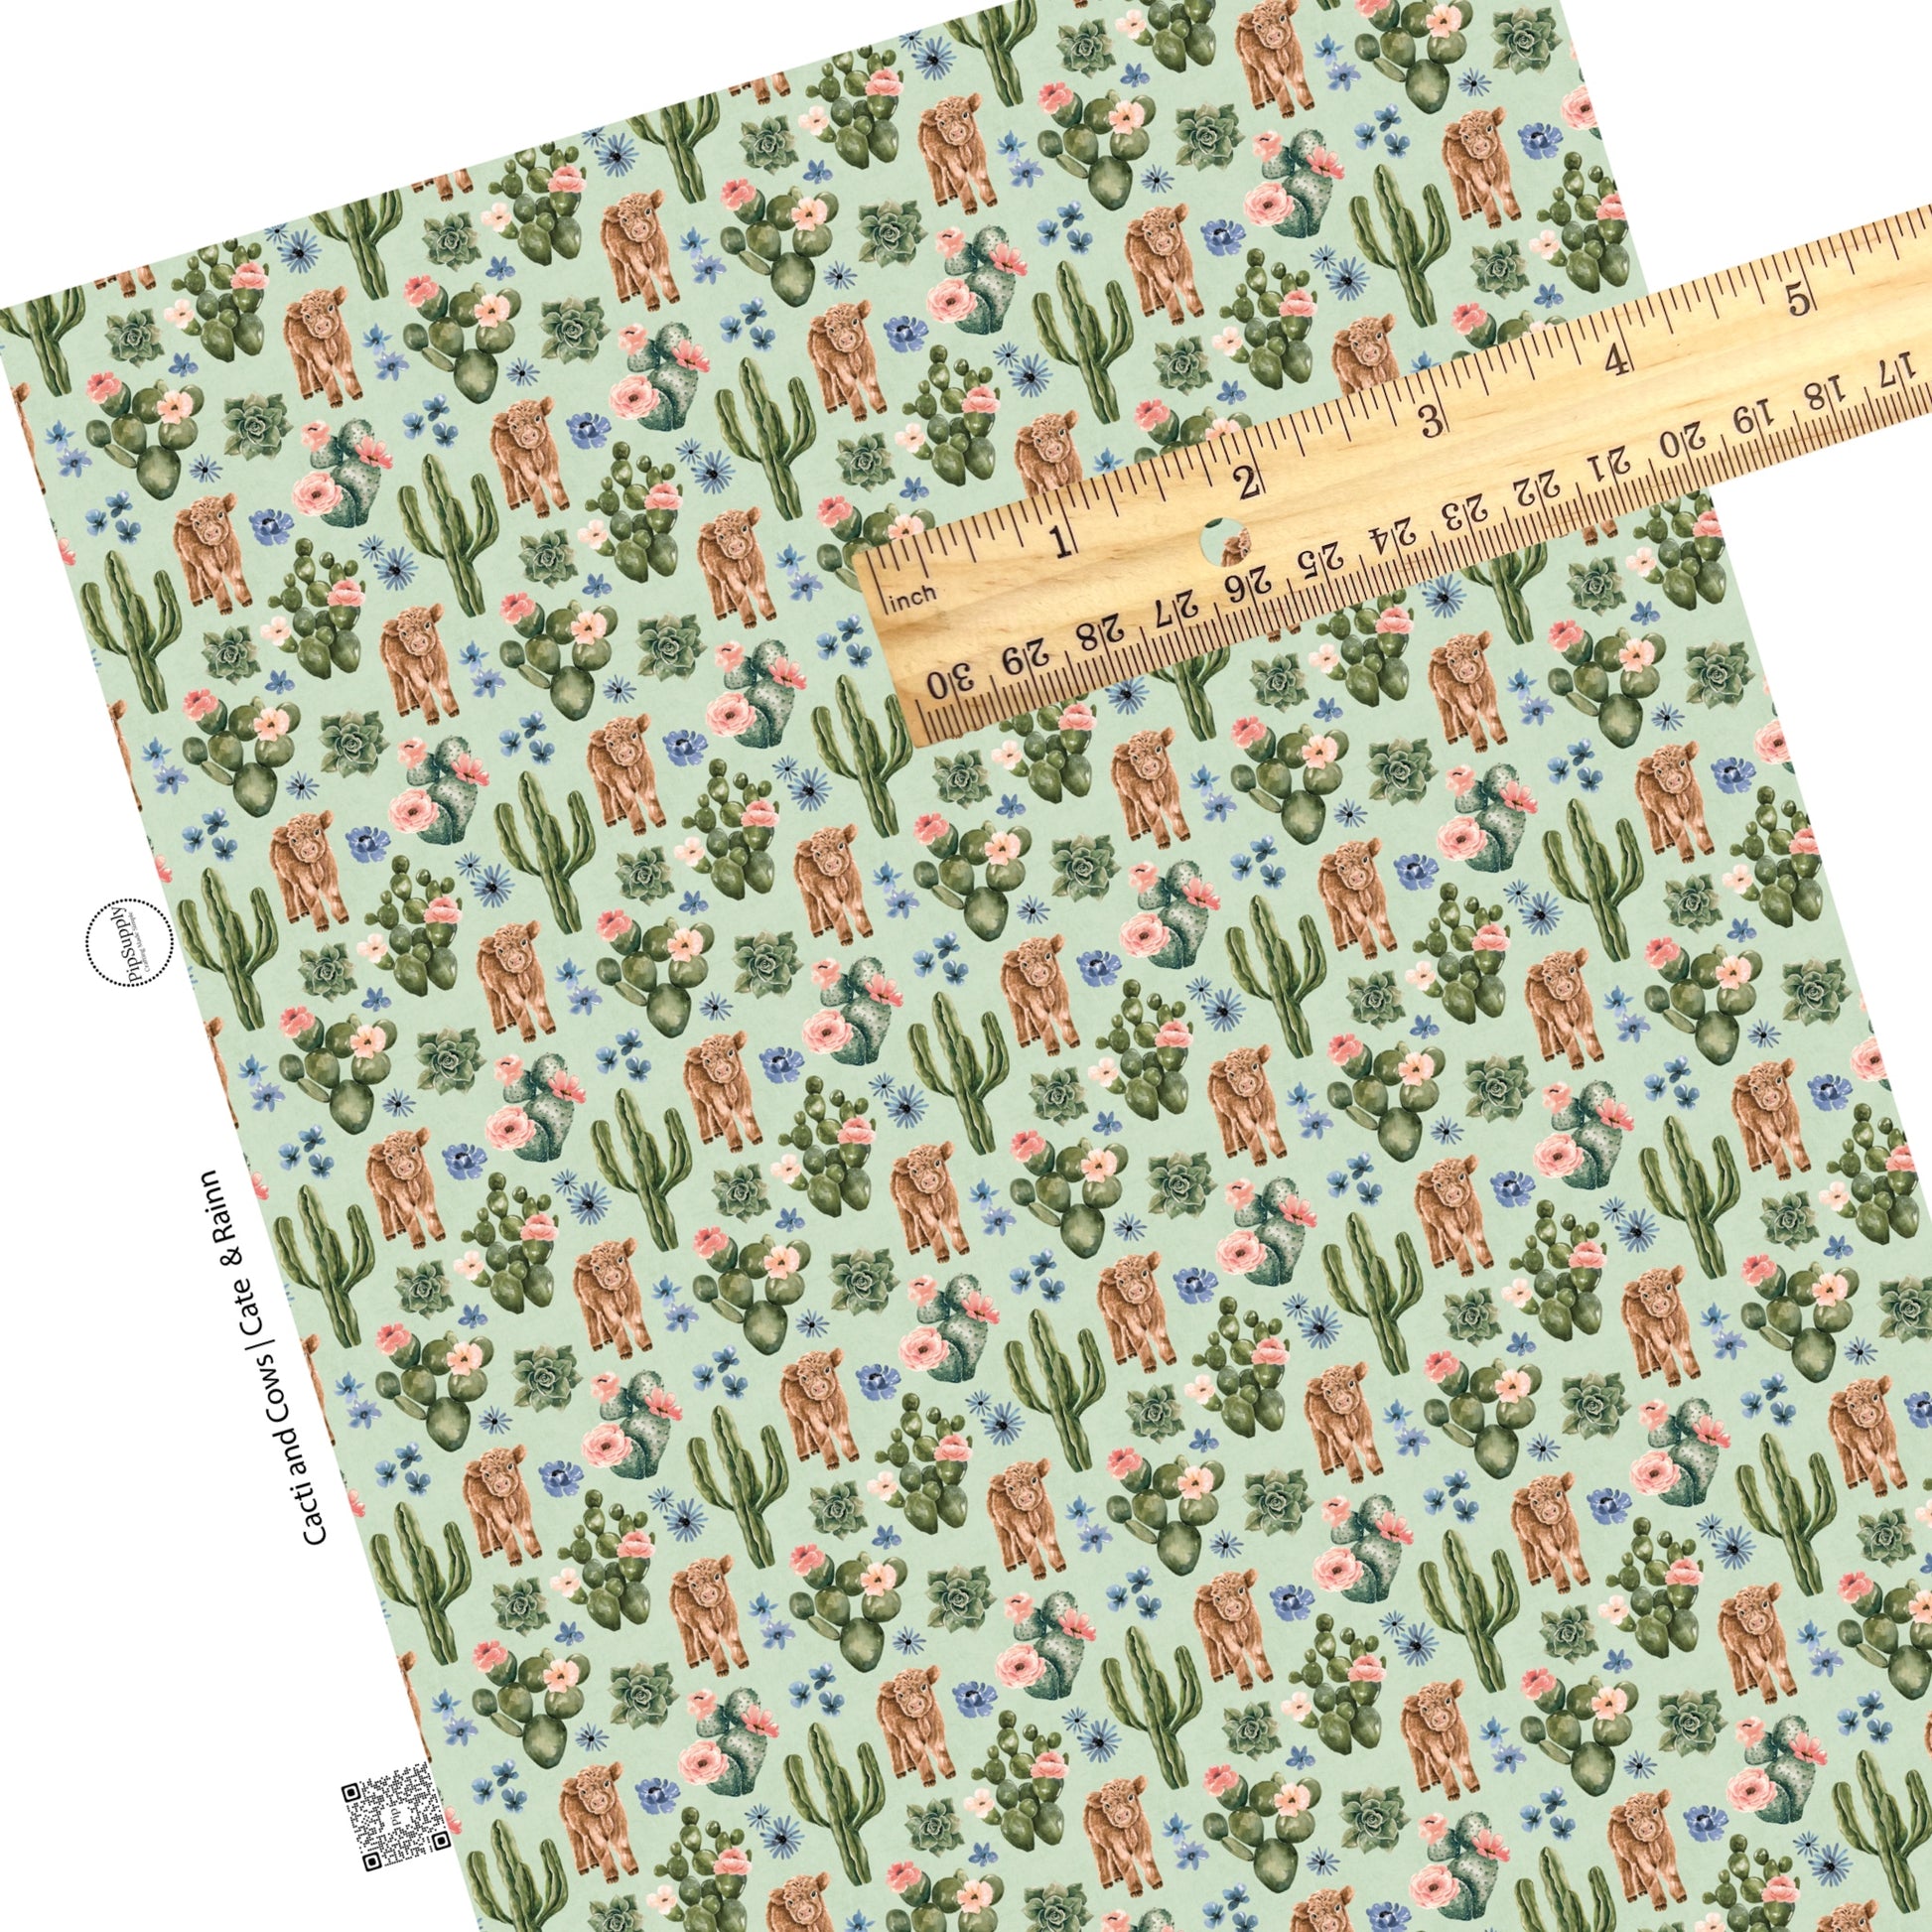 These cows, cacti, and flower pattern themed faux leather sheets contain the following design elements: brown cows surrounded by pink and blue flower bunches and cacti on aqua blue. Our CPSIA compliant faux leather sheets or rolls can be used for all types of crafting projects.